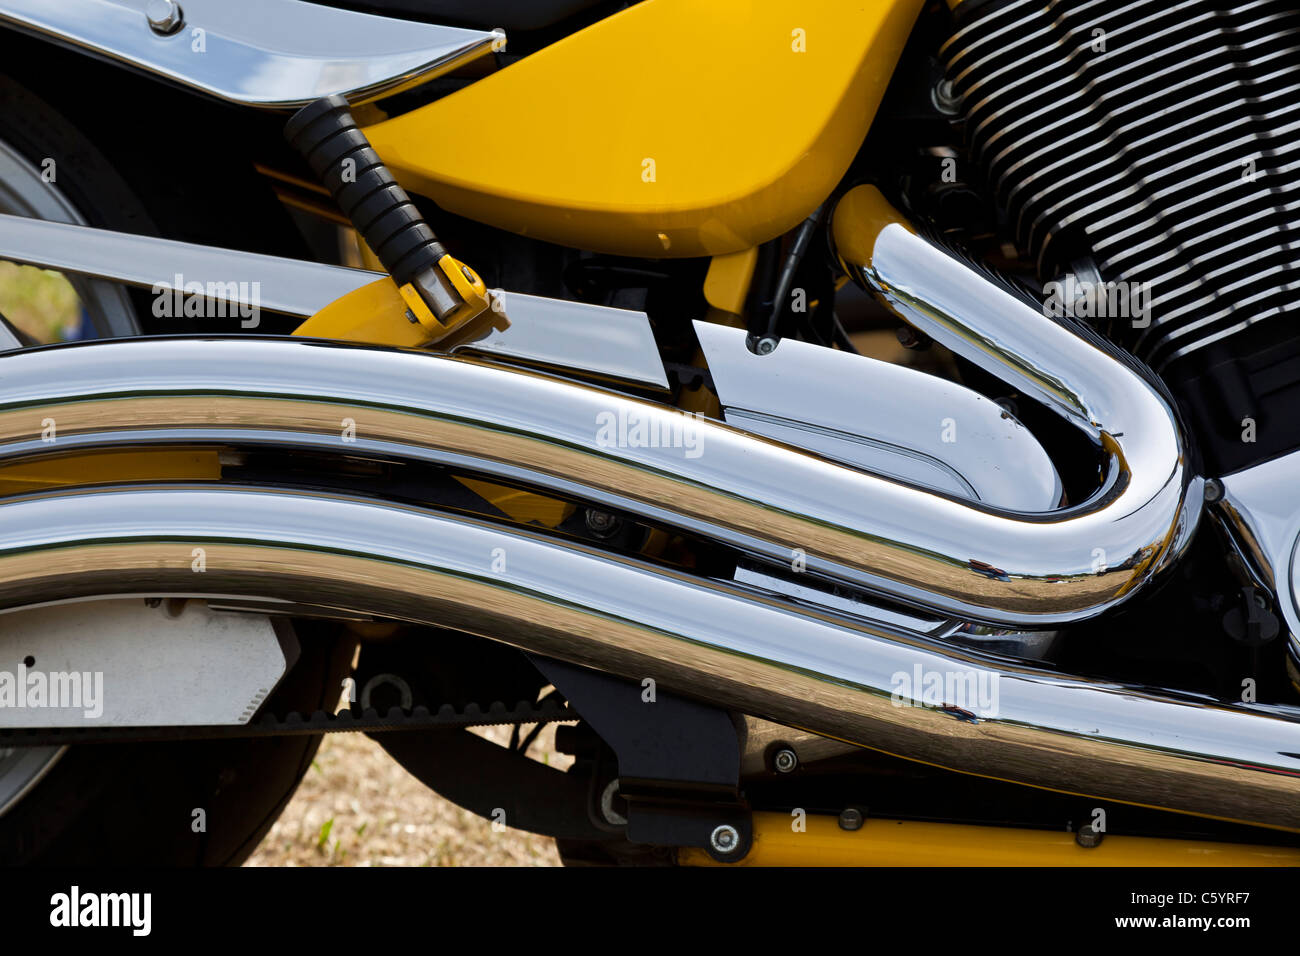 Victory motorcycle, detail. Stock Photo